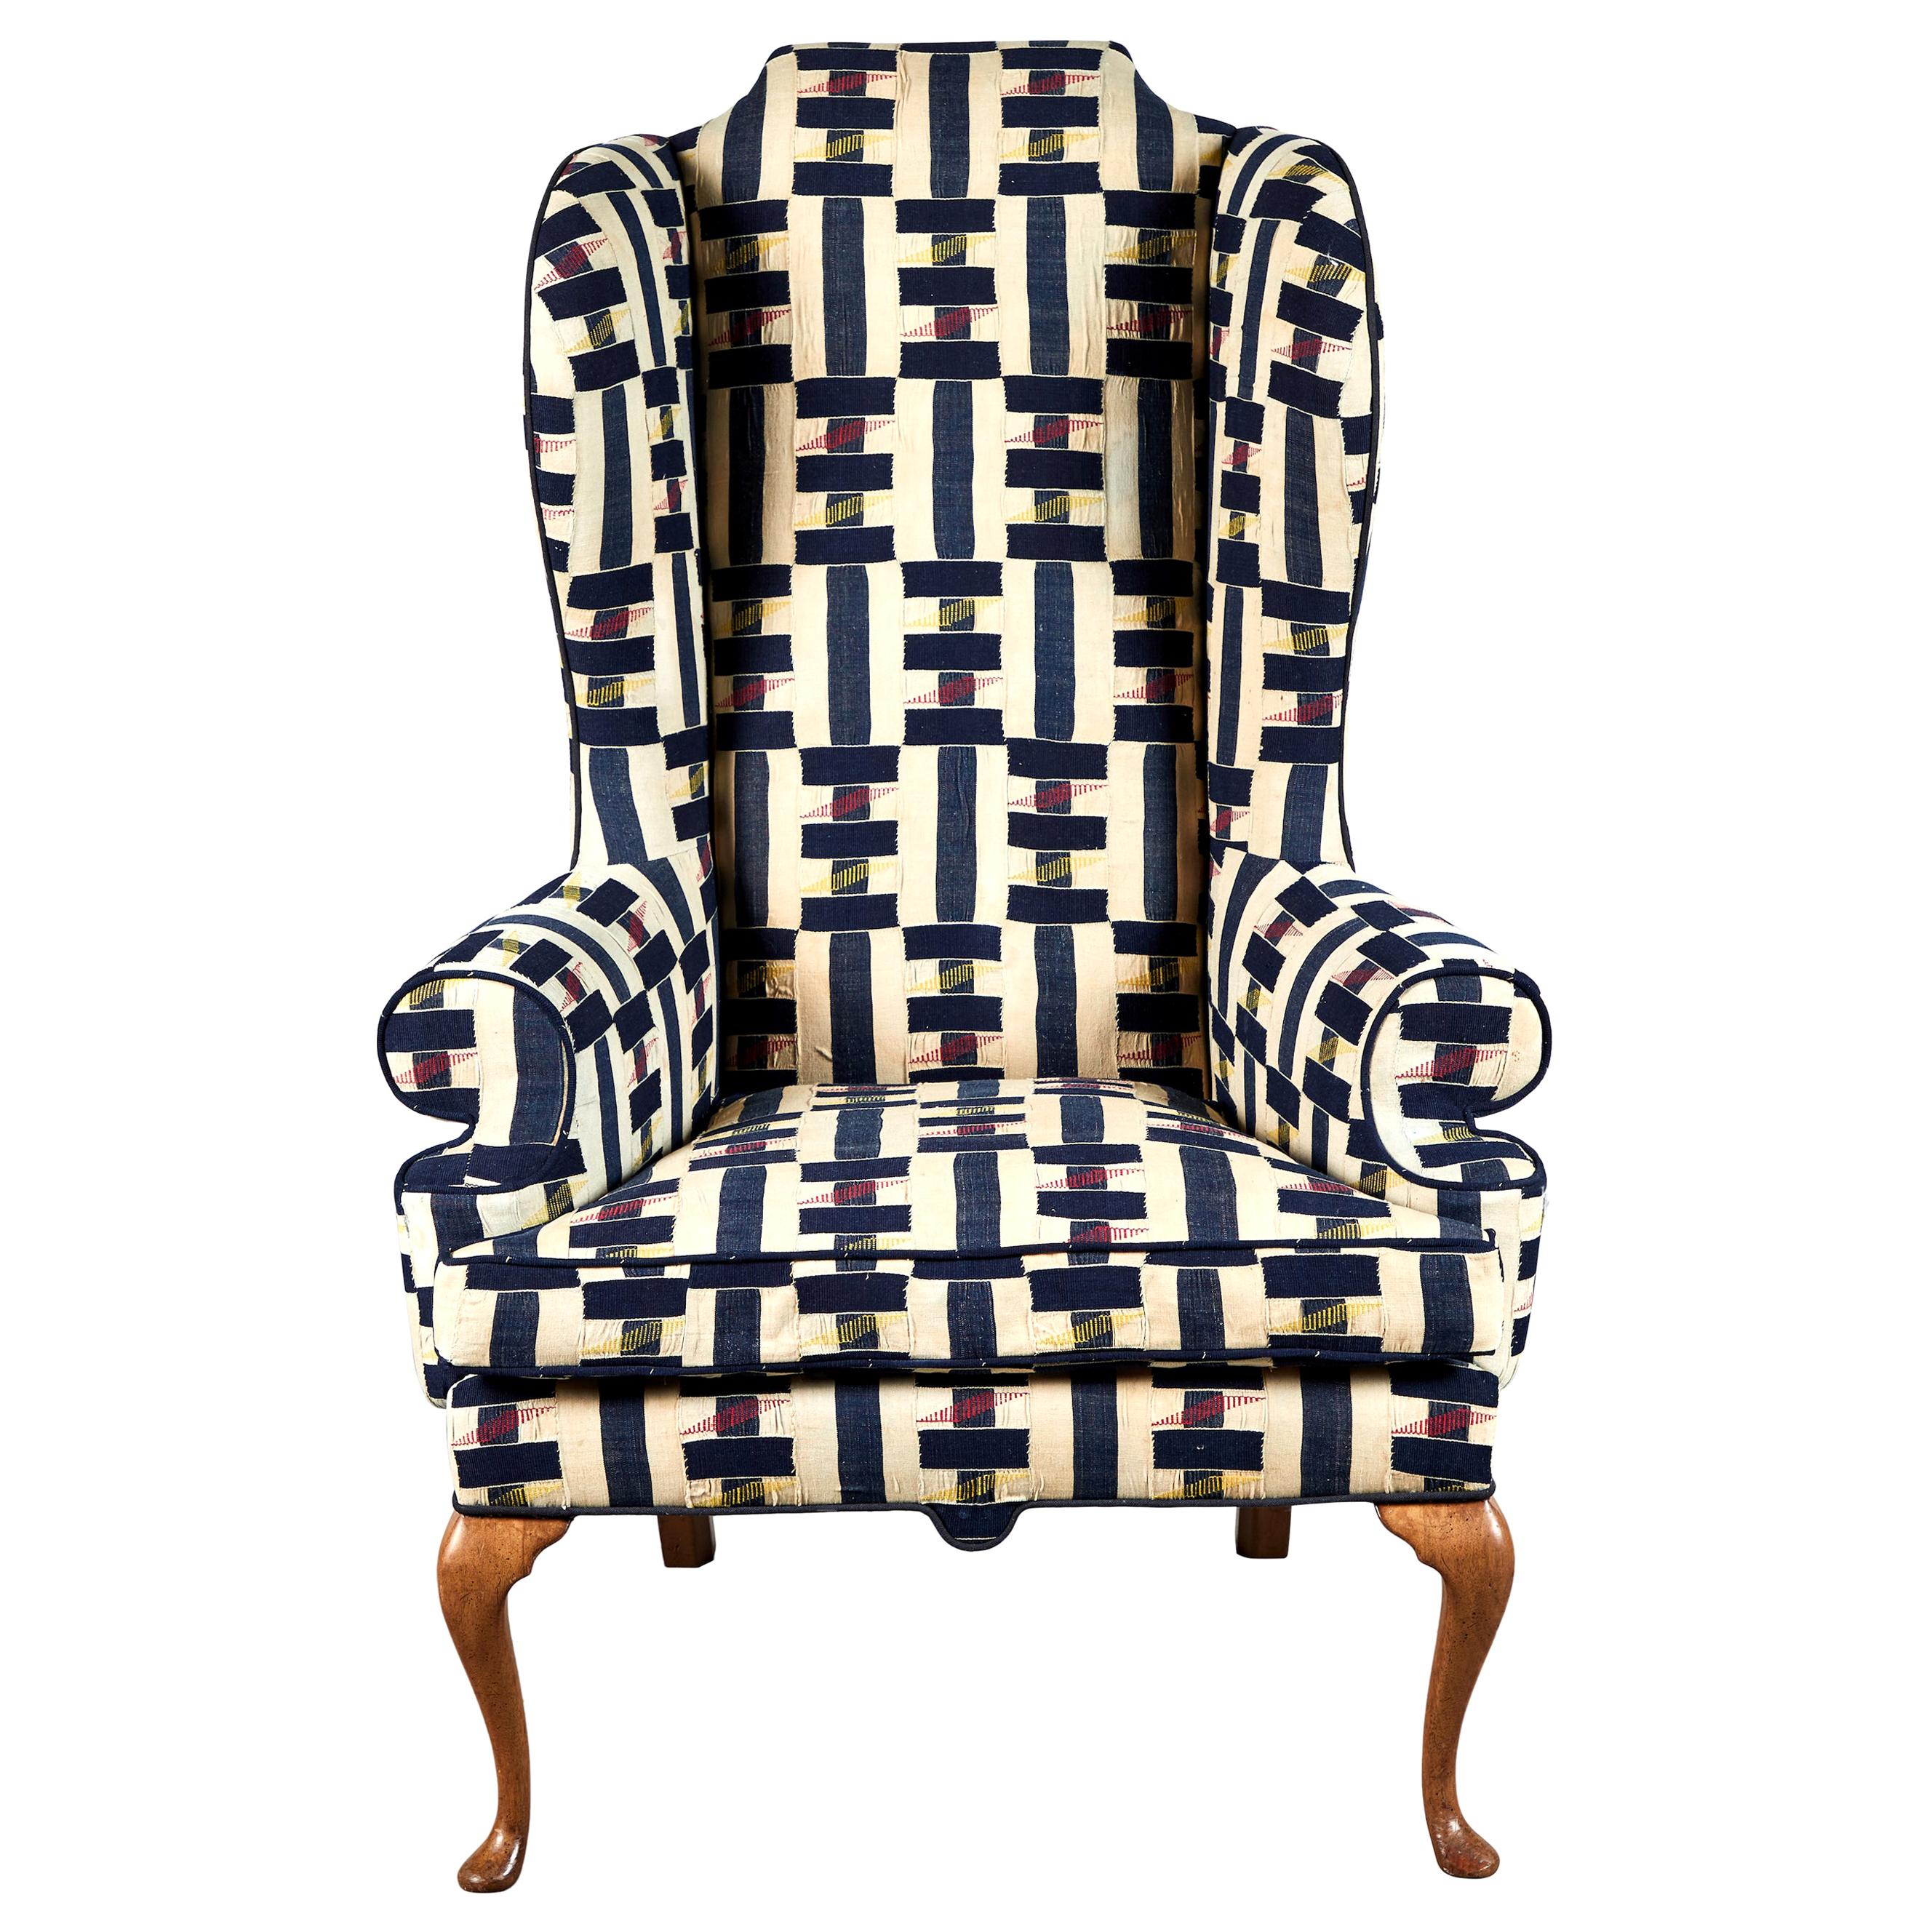 Vintage Wingback Chair in Multicolored Ewe Fabric from Ghana